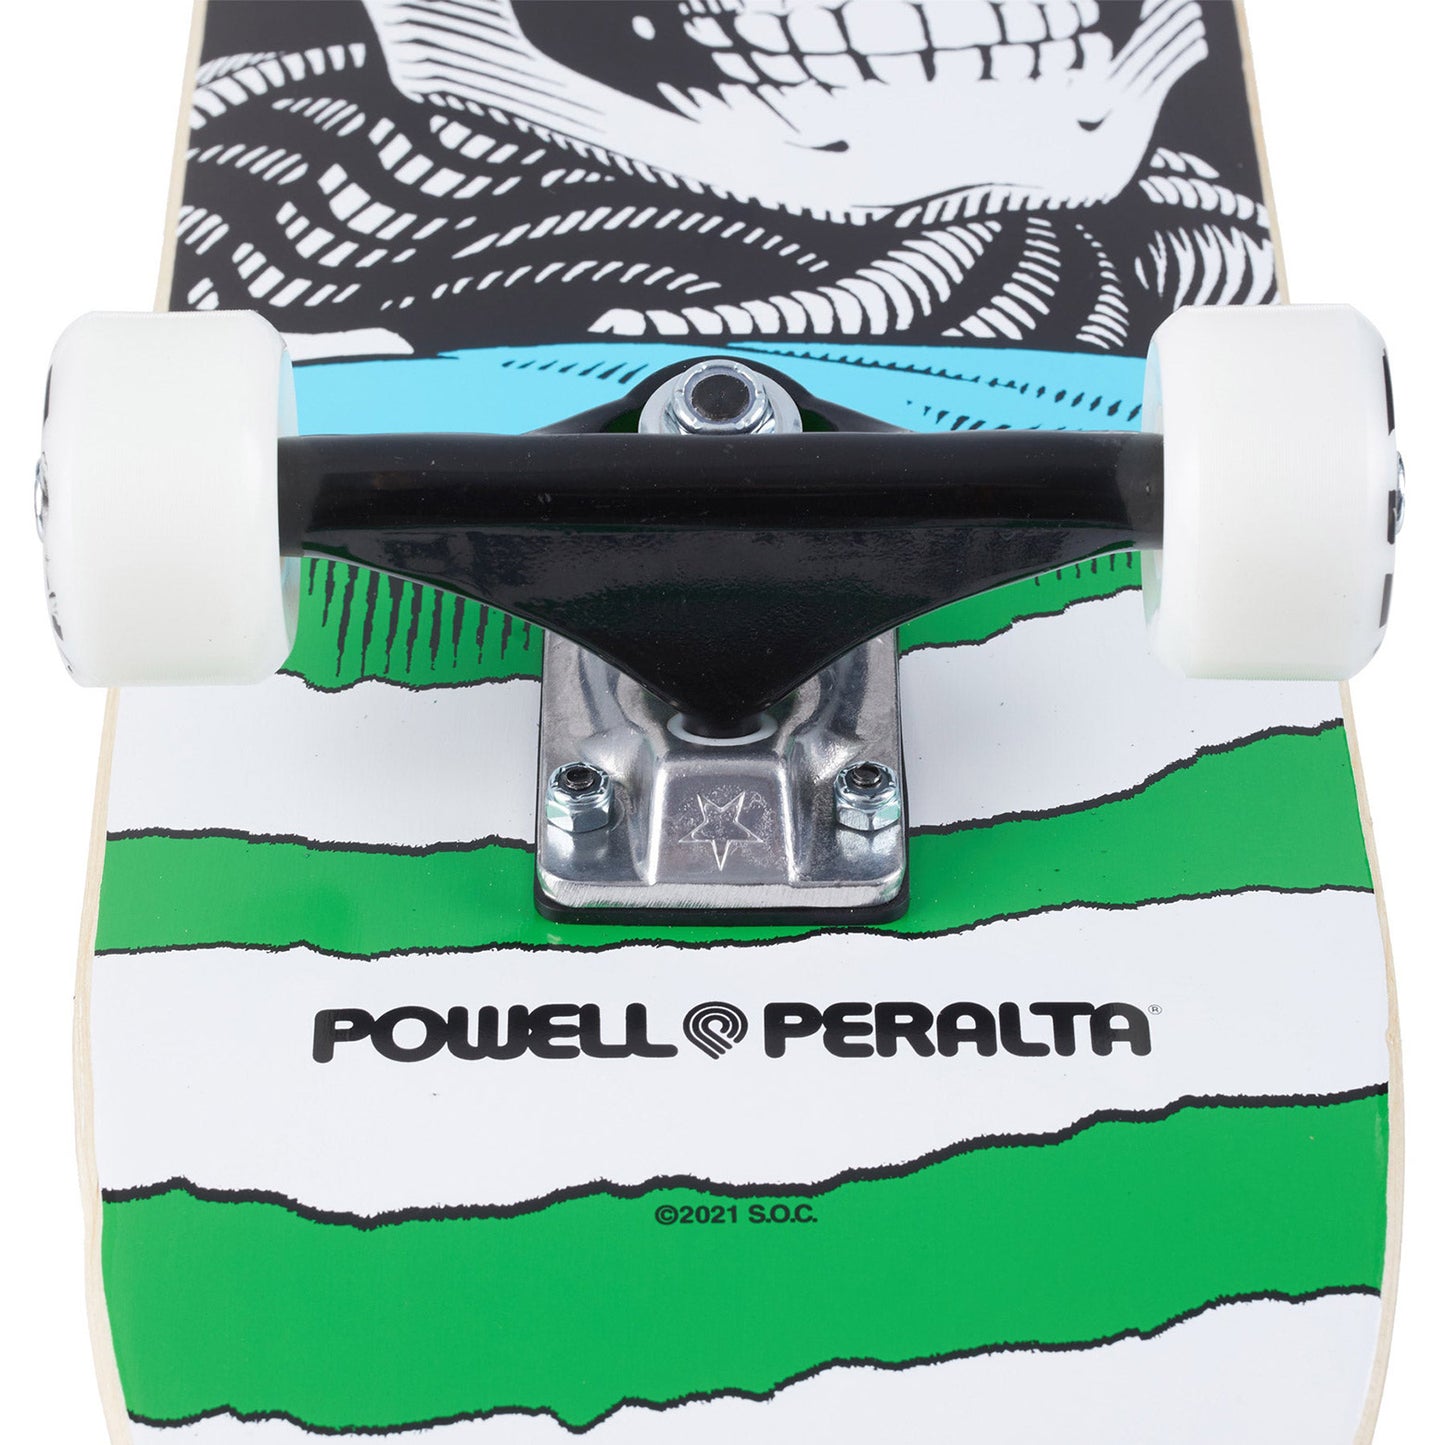 SKATE COMPLET POWELL PERALTA 7.5 X 30.70 RIPPER ONE OFF GREEN